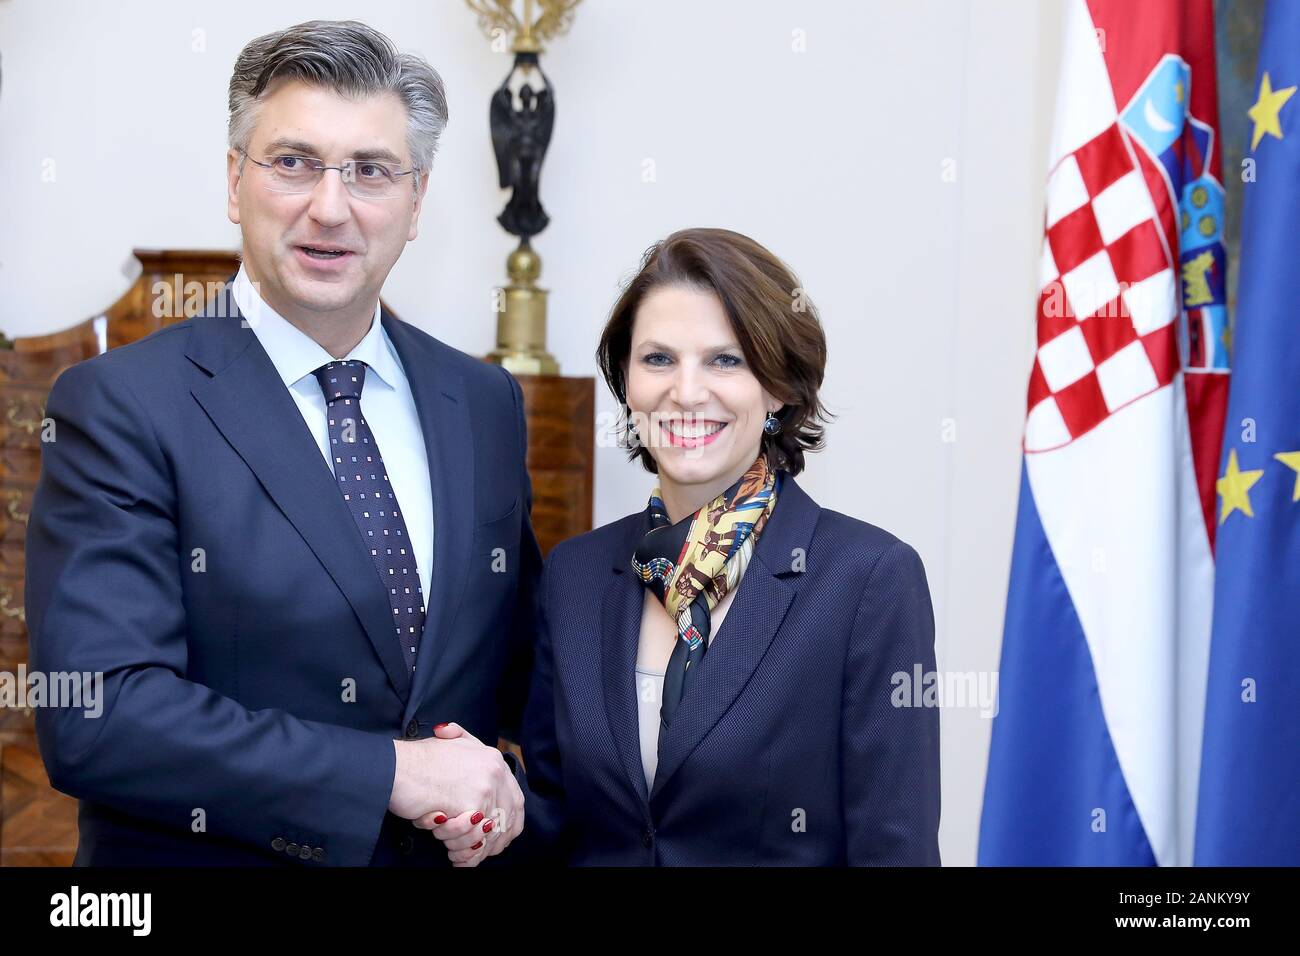 (200117) -- ZAGREB, Jan. 17, 2020 (Xinhua) -- Croatian Prime Minister Andrej Plenkovic (L) shakes hands with Austrian Federal Minister for European Affairs Karoline Edtstadler during their meeting in Zagreb, Croatia, on Jan. 17, 2020. Croatia and Austria will continue to push for a decision to open accession negotiations with Albania and North Macedonia at European Council level in March, Croatian Prime Minister Andrej Plenkovic and Austrian Federal Minister for European Affairs Karoline Edtstadler said here at a meeting on Friday. (Patrik Macek/Pixsell via Xinhua) Stock Photo